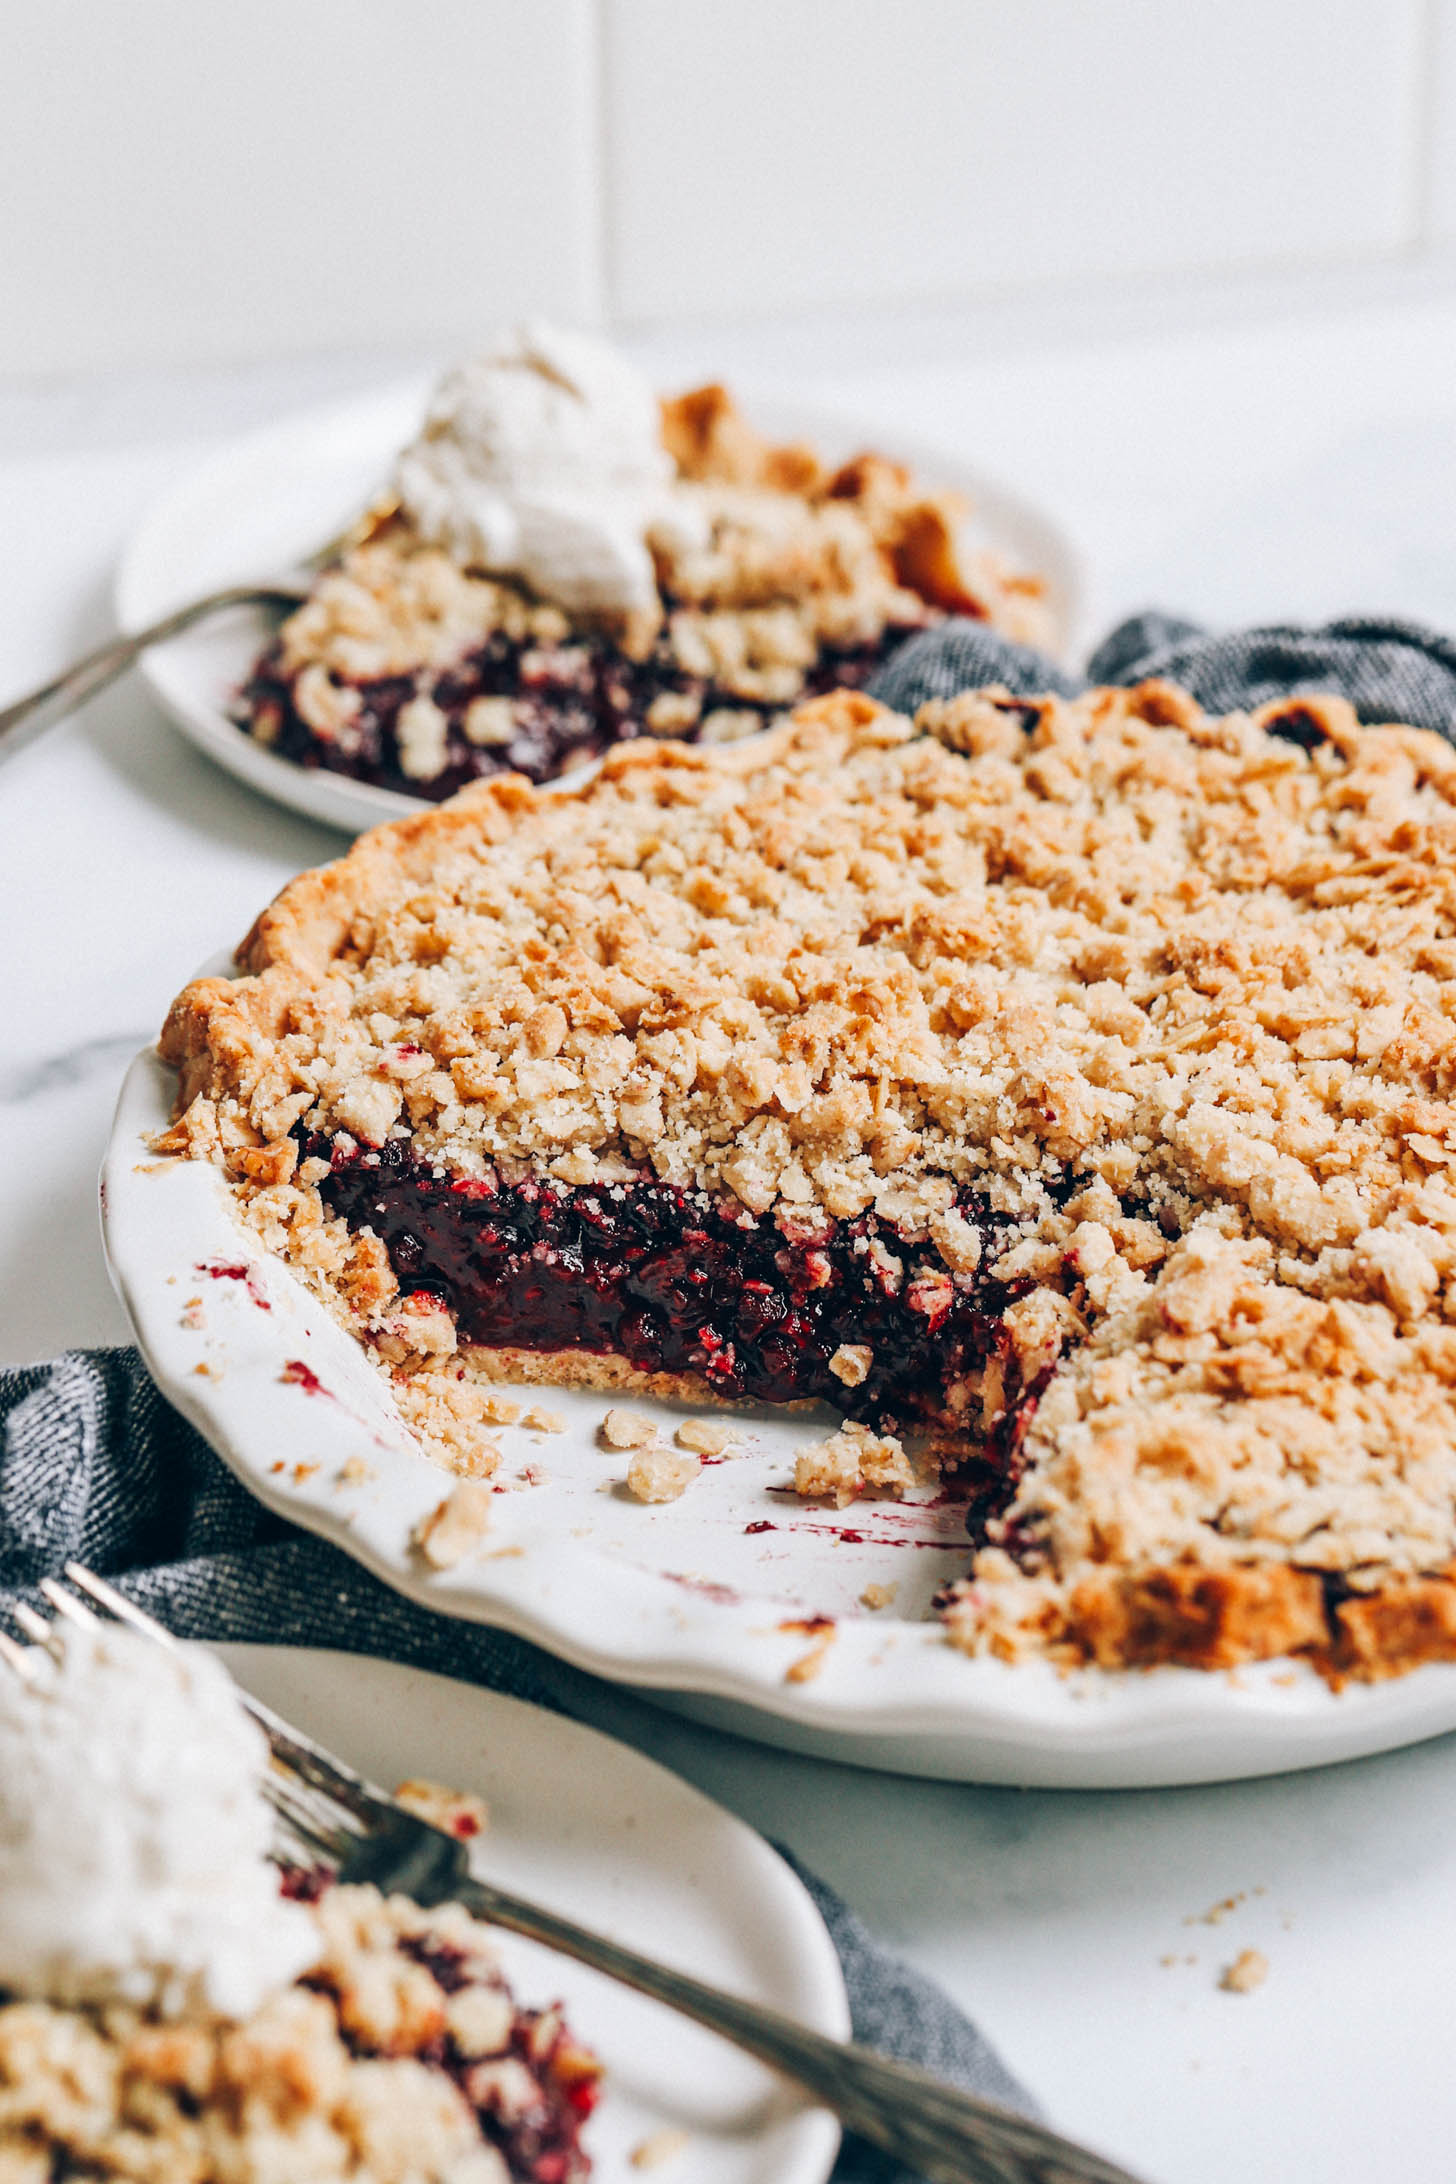 Pie pan and plates of our vegan and gluten-free mixed berry crumble pie